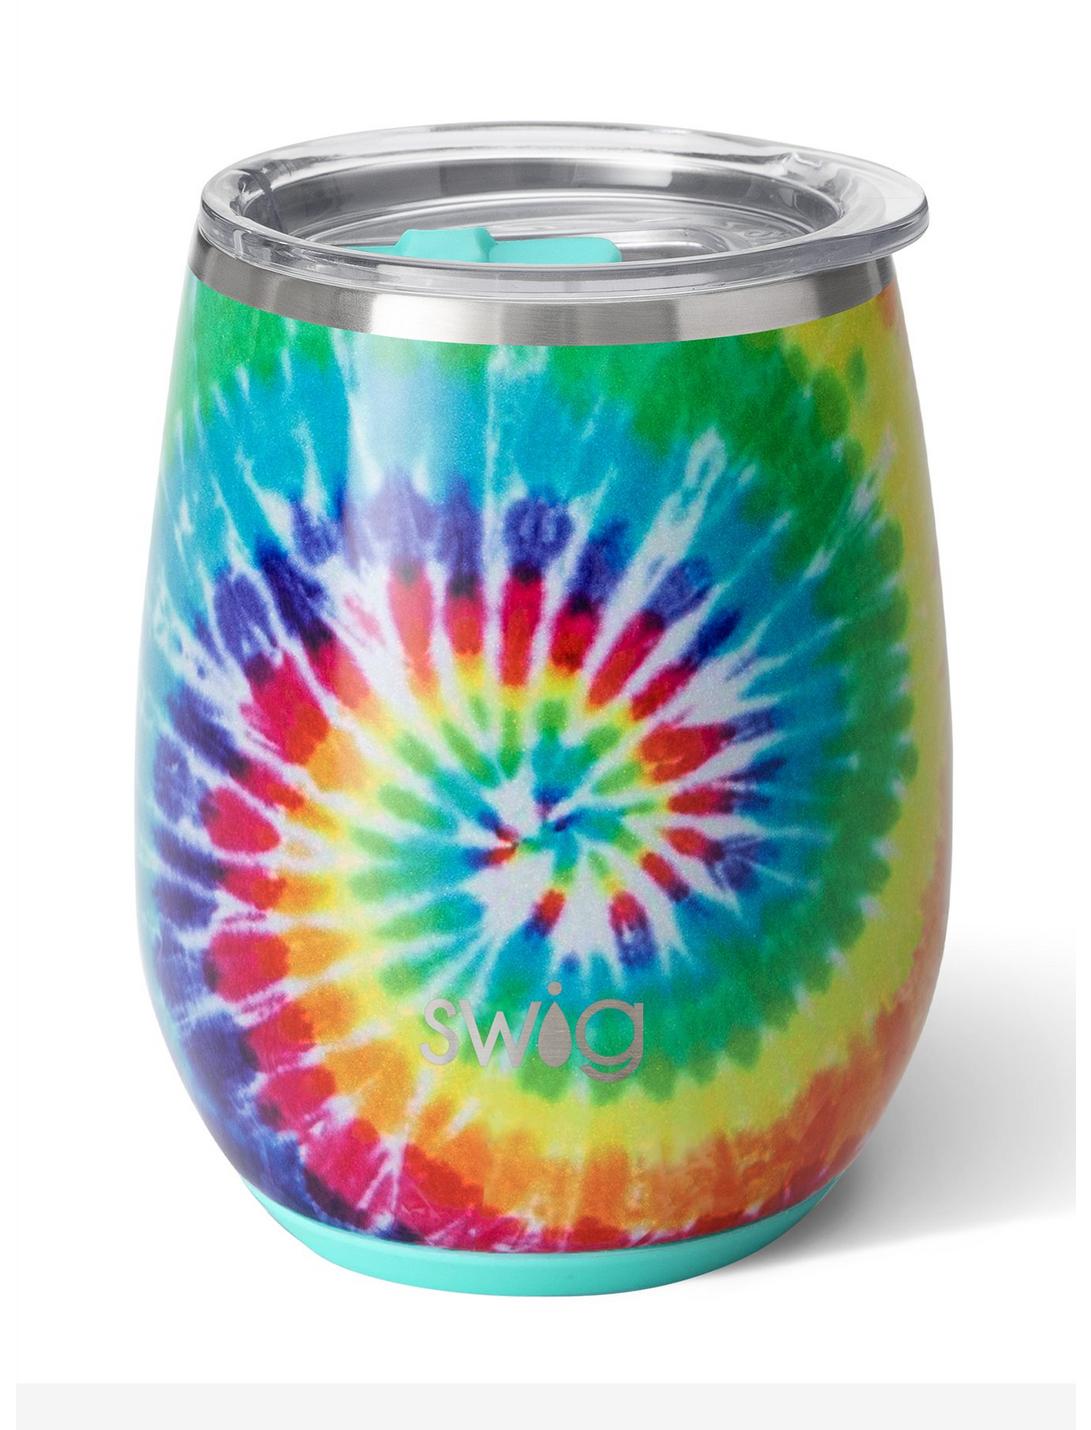 Swig 14oz Insulated Cup- Tie Dye